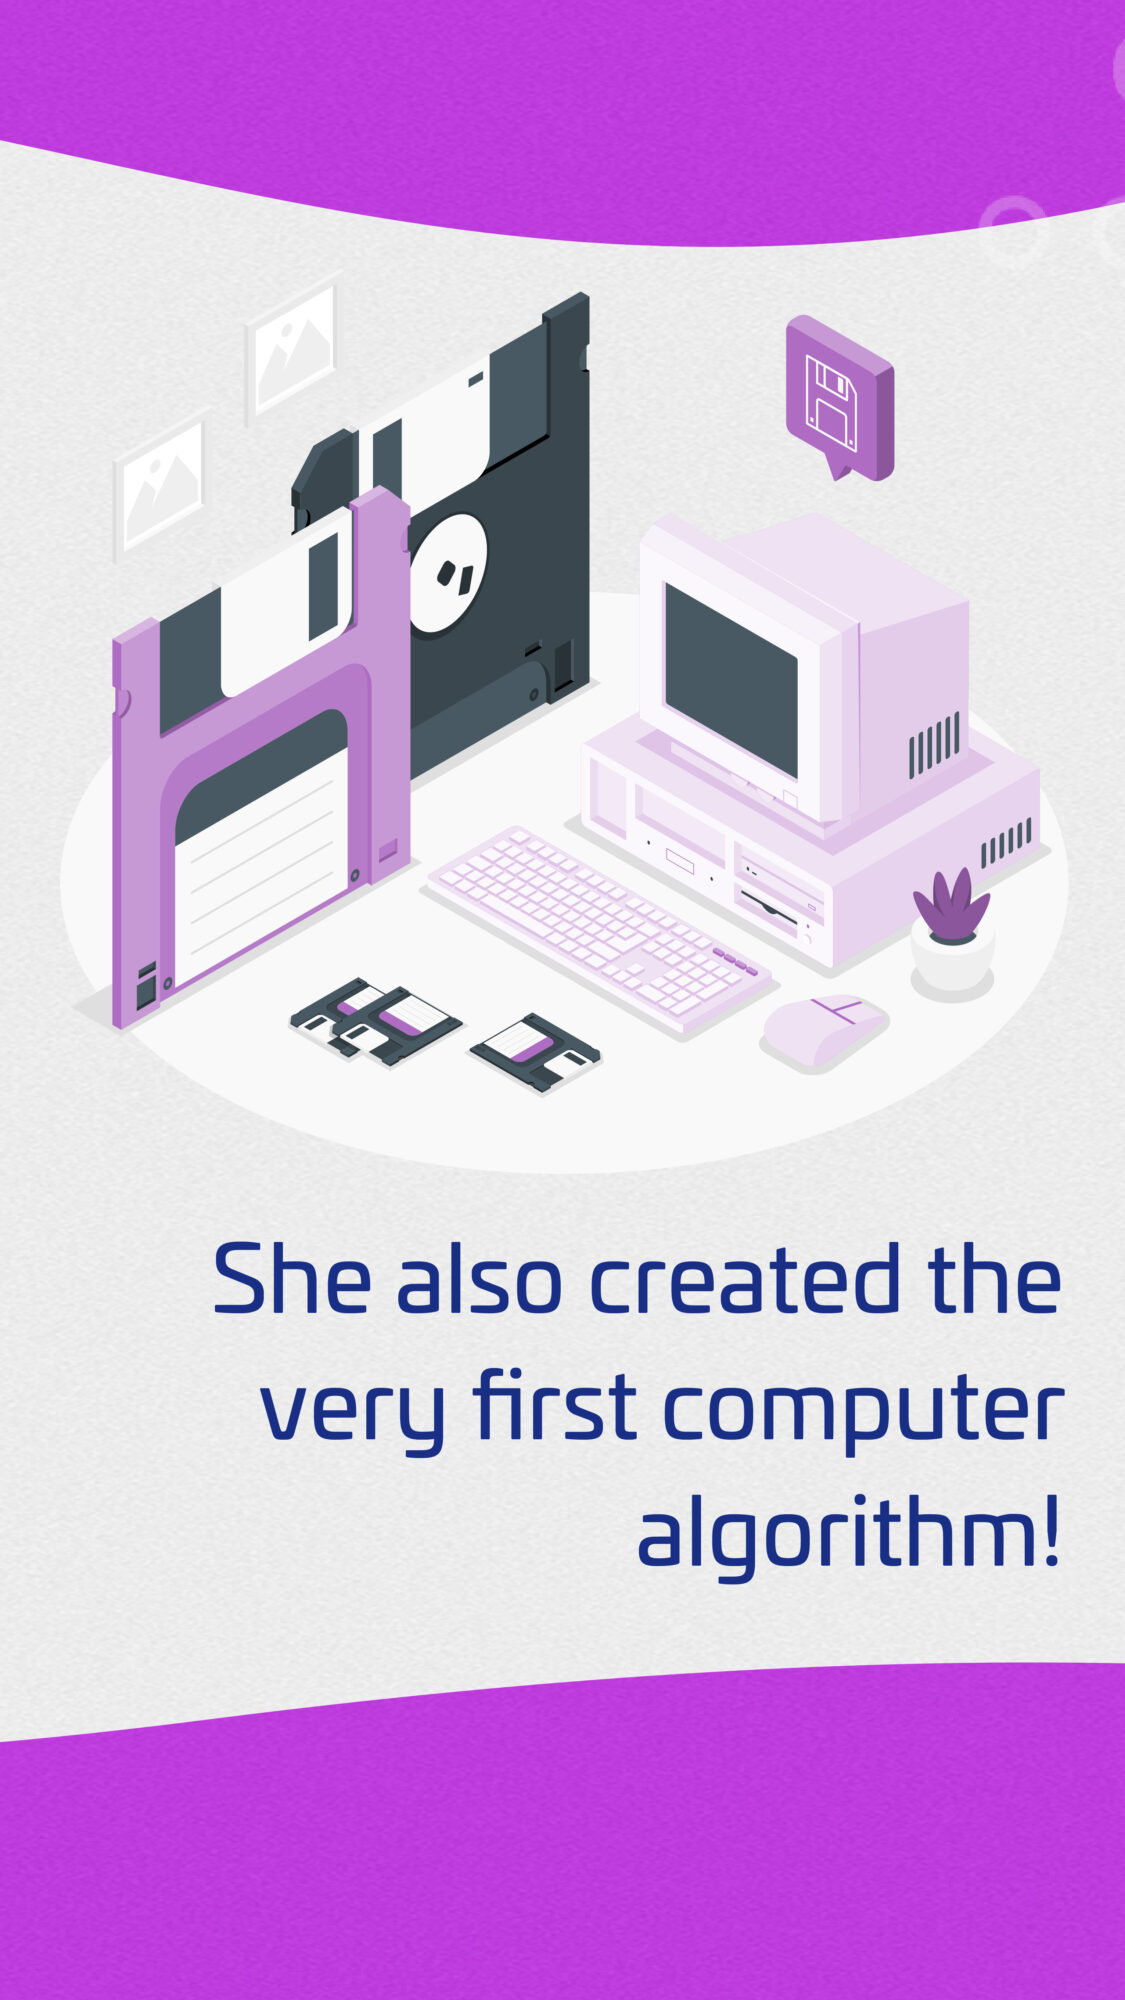 An infographic on creating the very first computer algorithm. Ada Lovelace 'created the very first computer algorithm!'